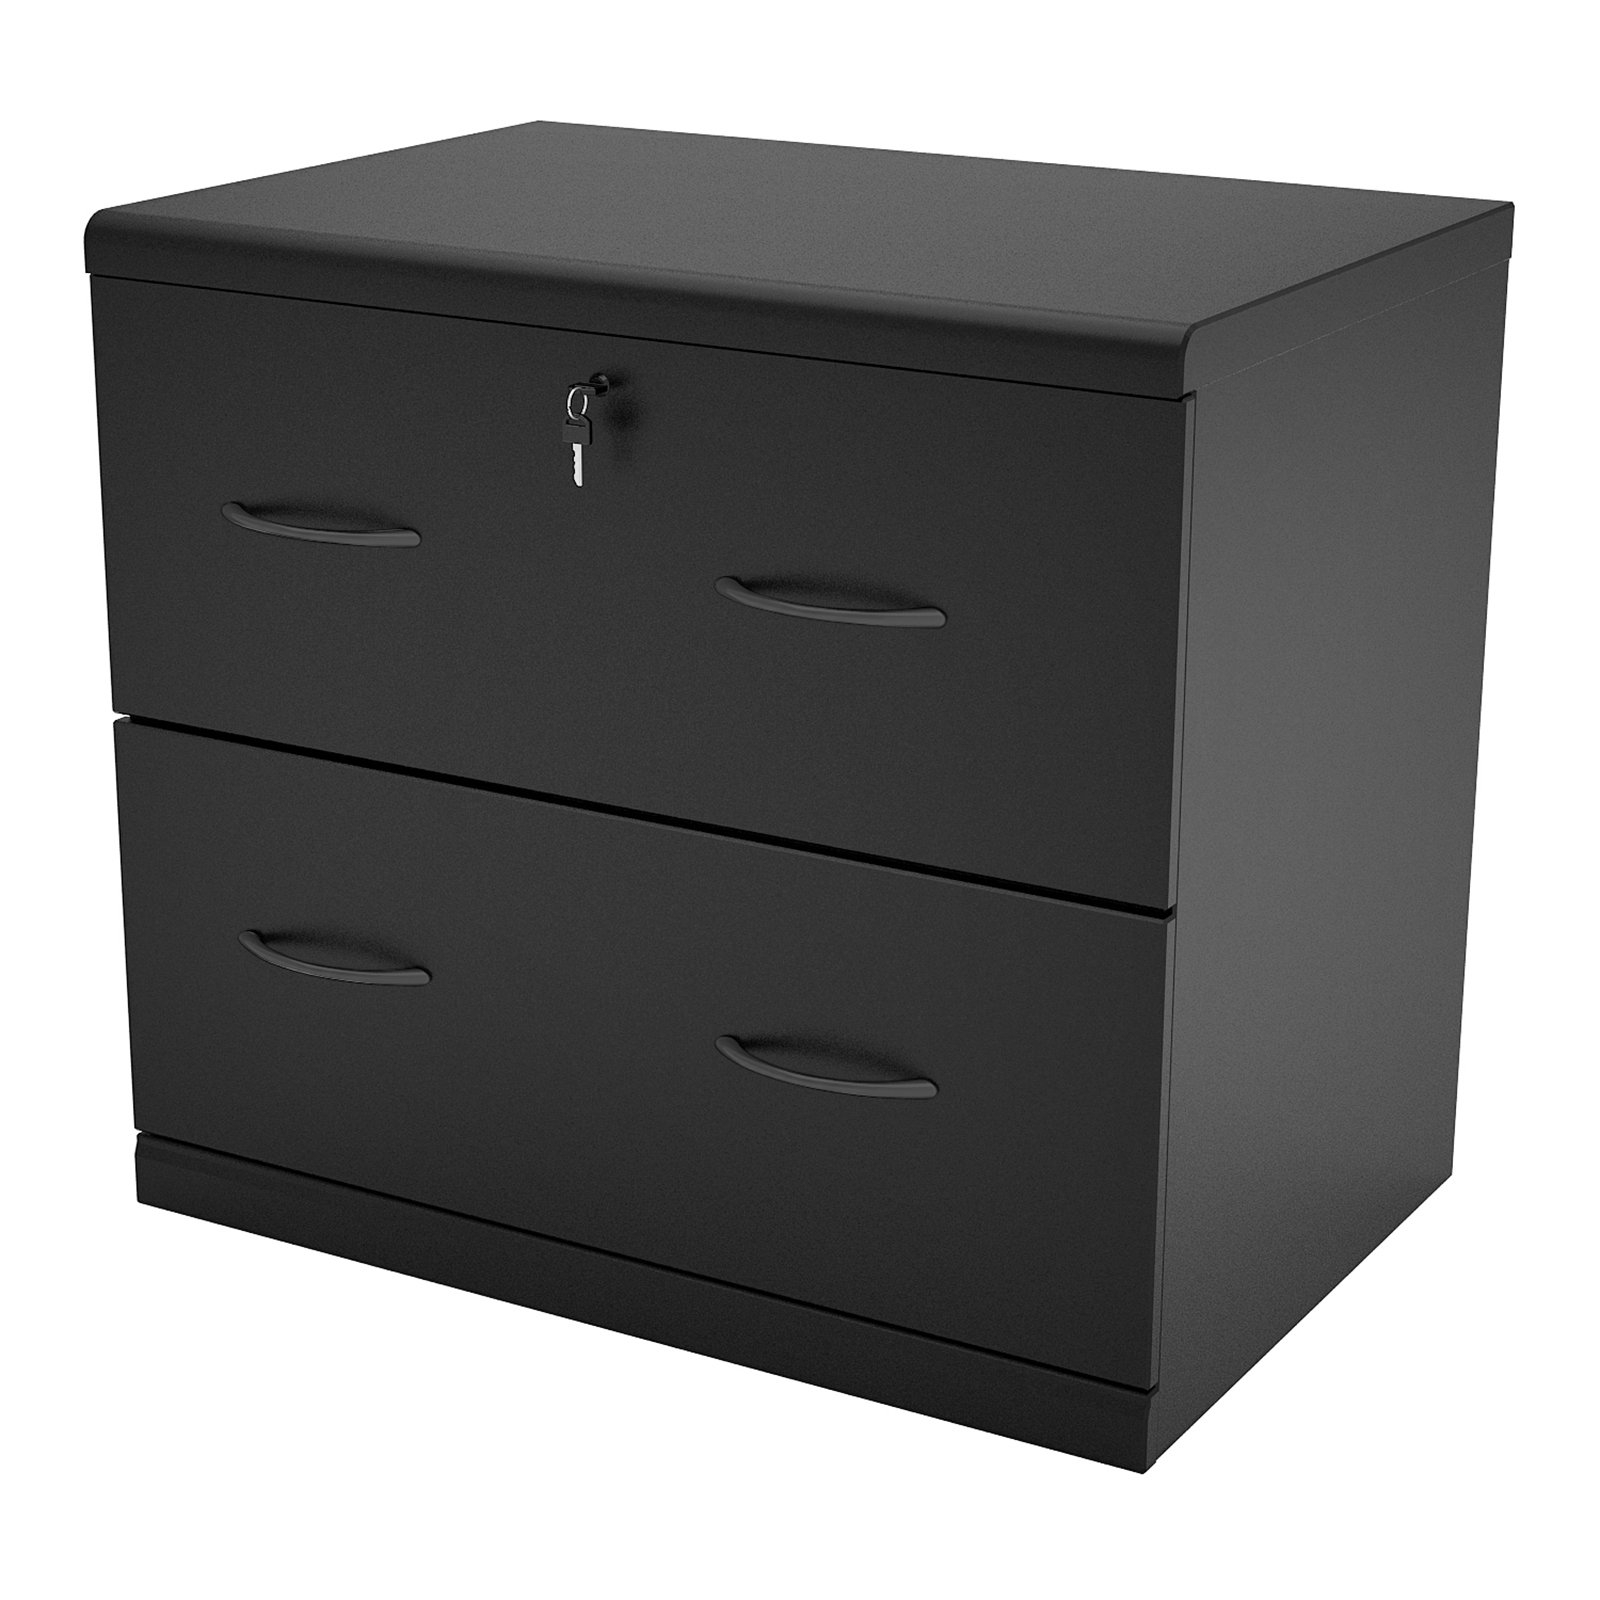 2 Drawer Lateral Wood Lockable Filing Cabinet Black Walmart throughout size 1600 X 1600